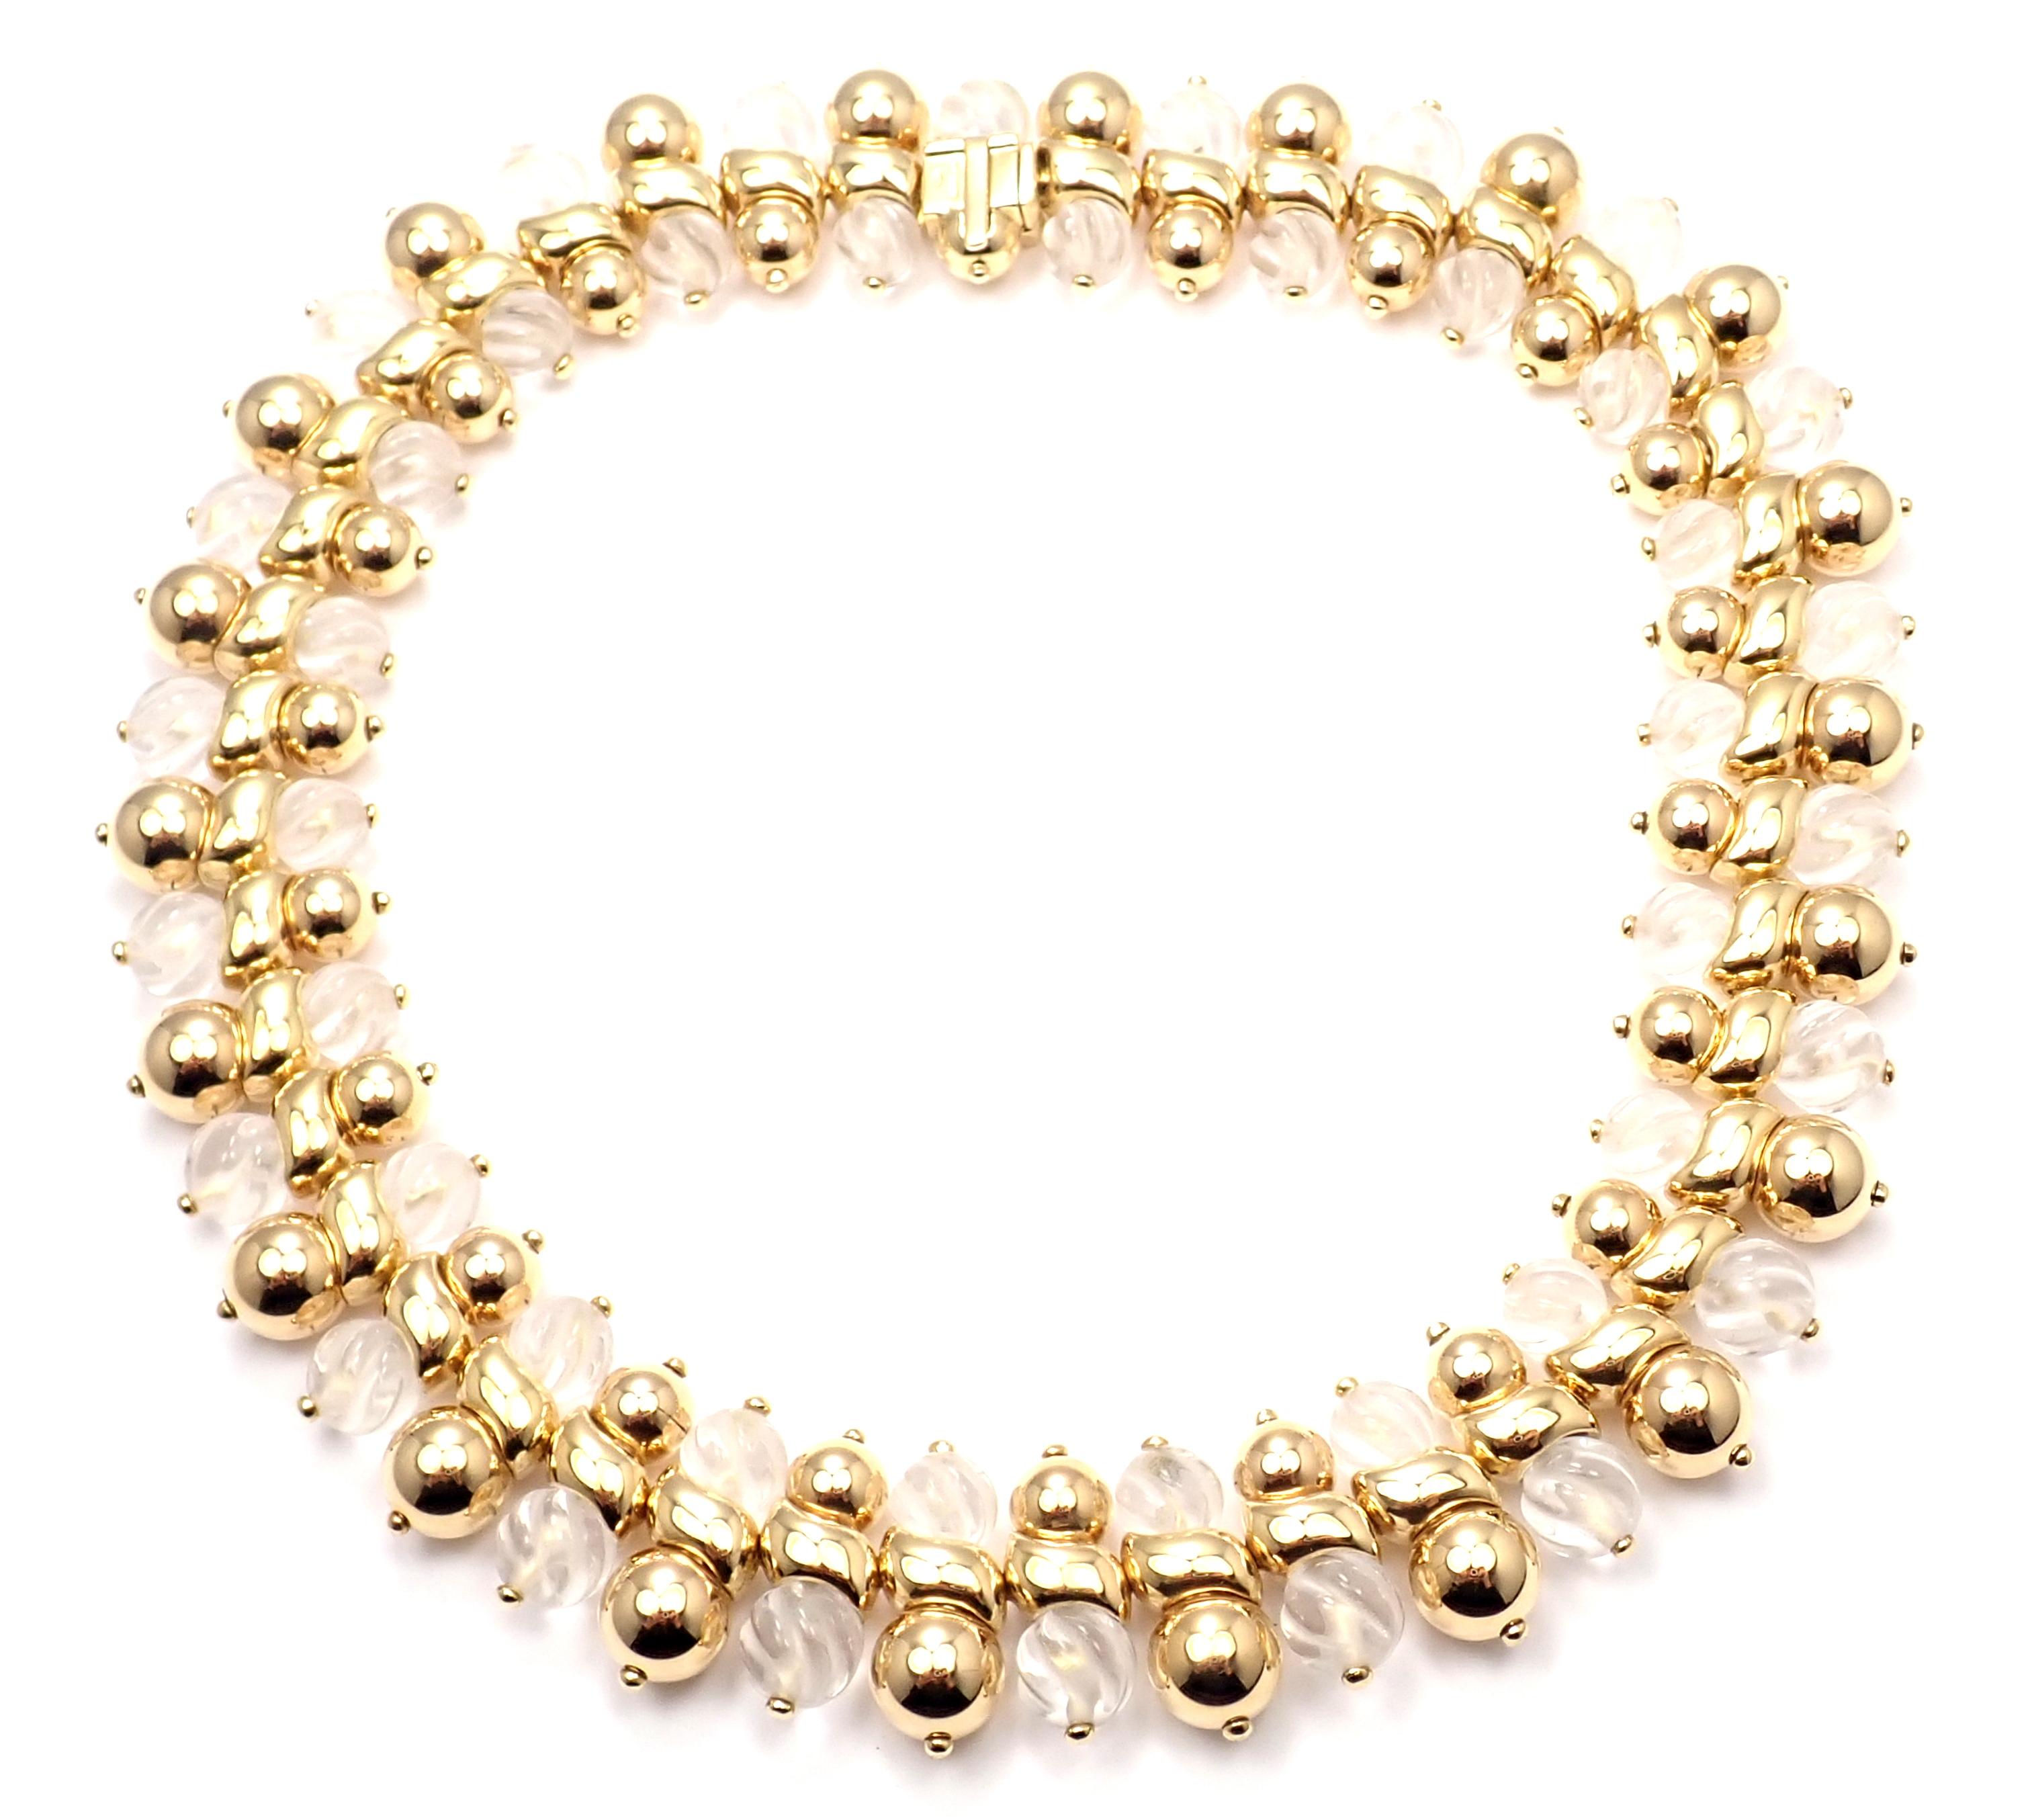 18k Yellow Gold Diamond Rock Crystal Necklace by Boucheron Paris. 
With 96 round brilliant cut diamonds VS1 clarity, E color total weight 
approximately 2.2 ct
44 rock crystal beads 8mm and 9mm each
Details: 
Weight: 150 grams
Length: 16